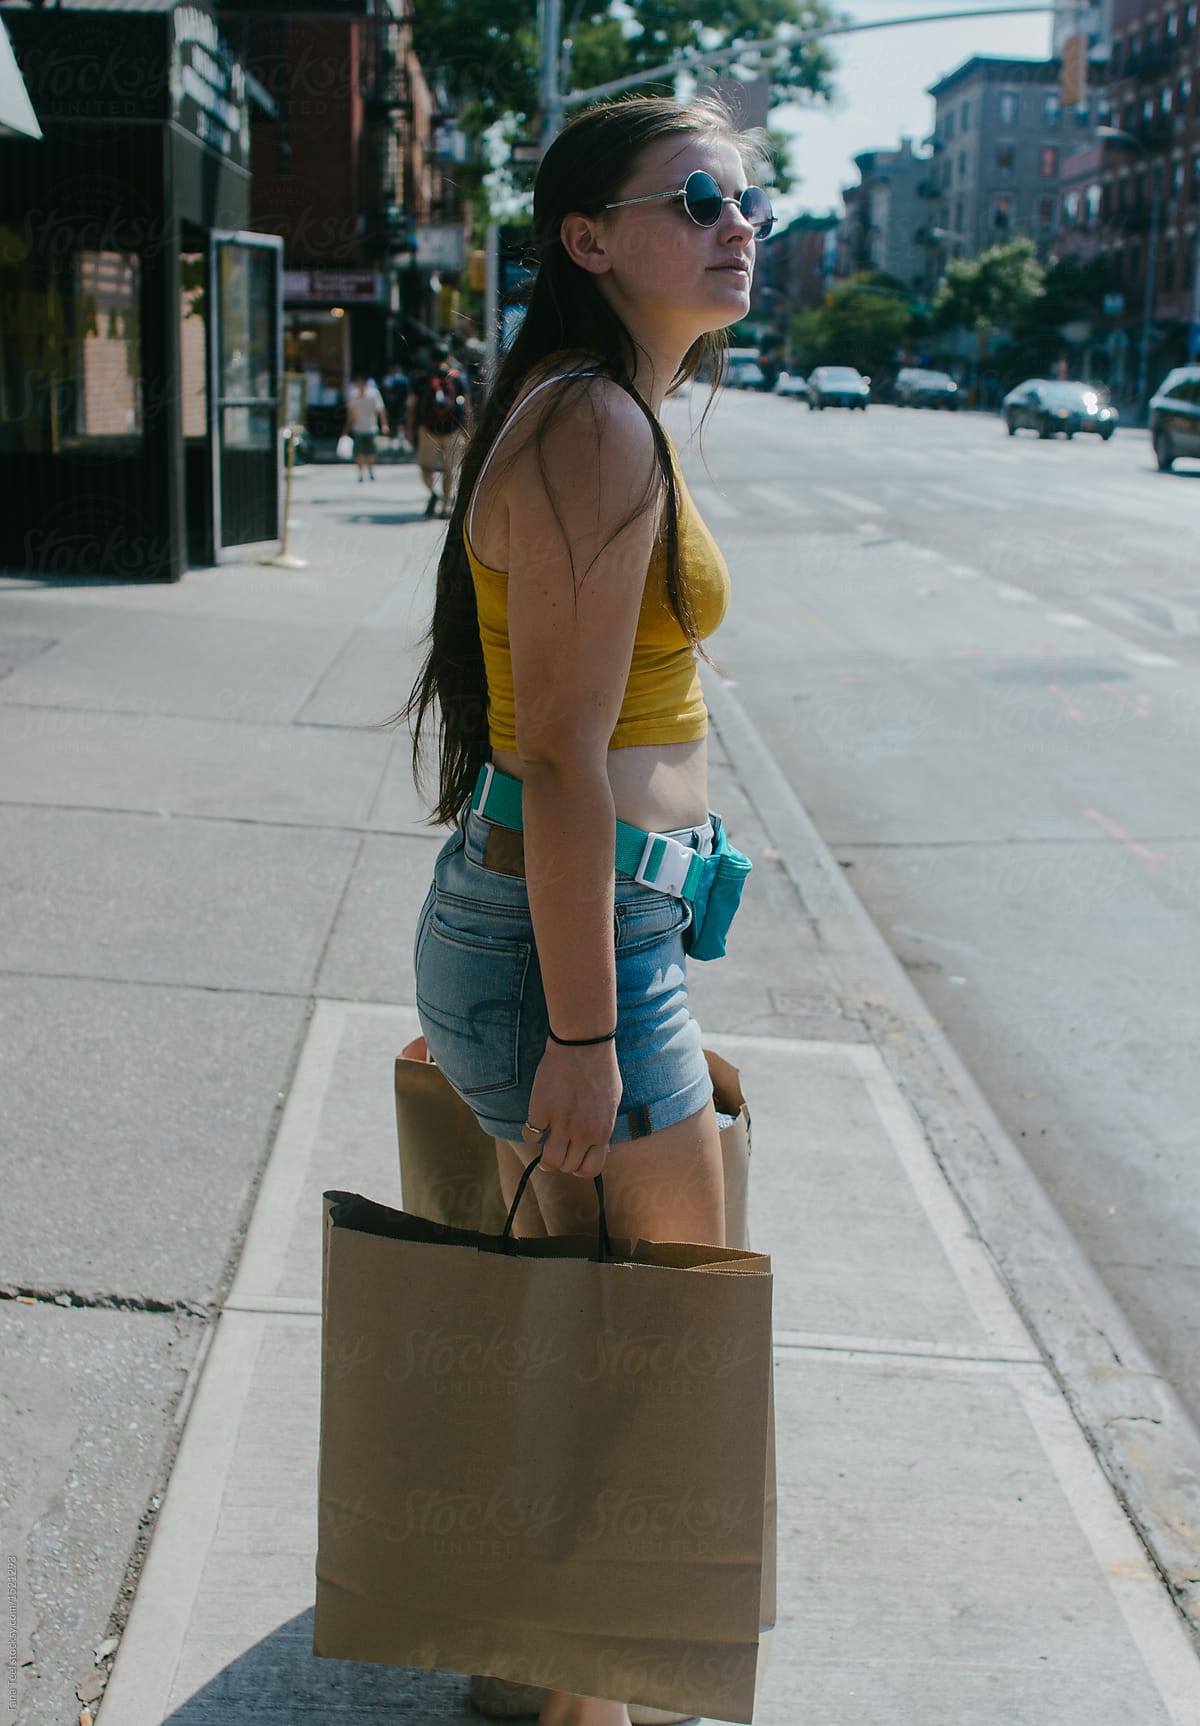 teenager holding shopping bags standing on city sidewalk